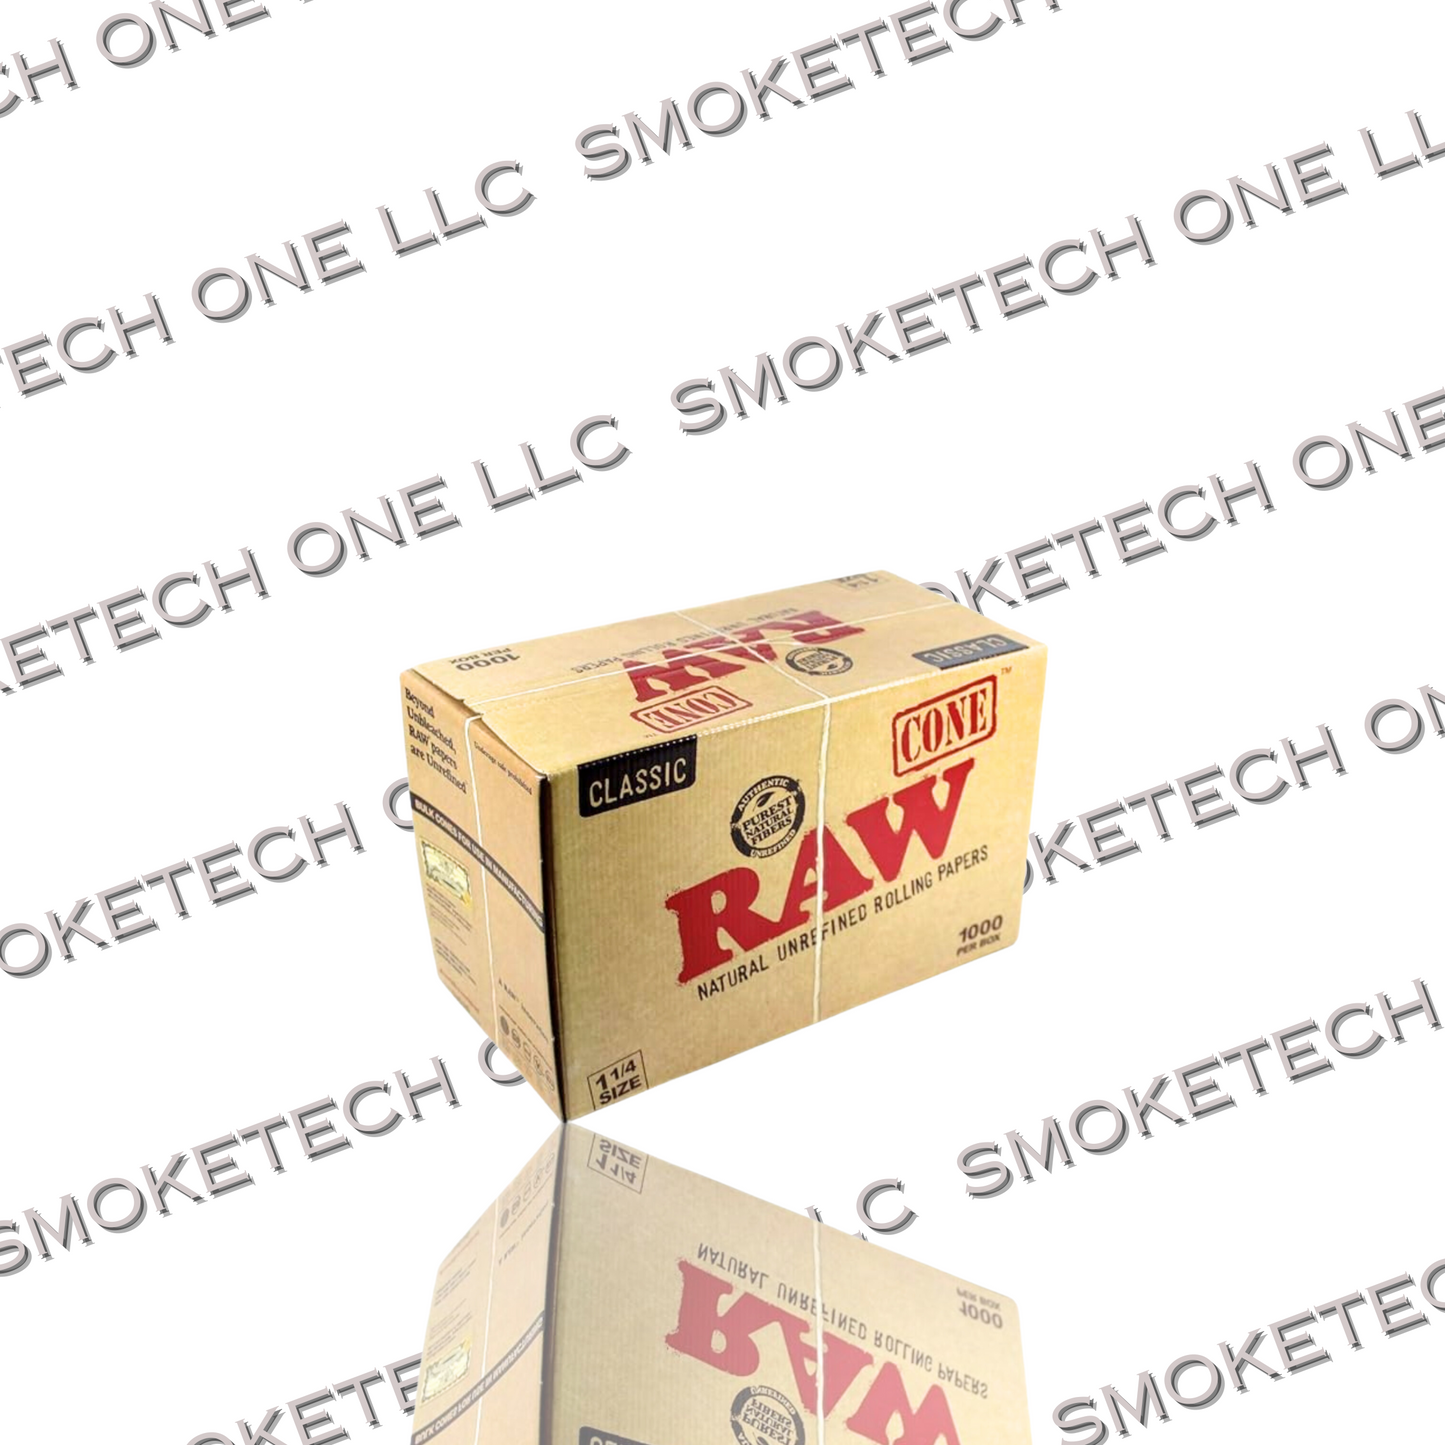 RAW Pre Rolled Cones Classic 1 1/4 Size (1000 CT)